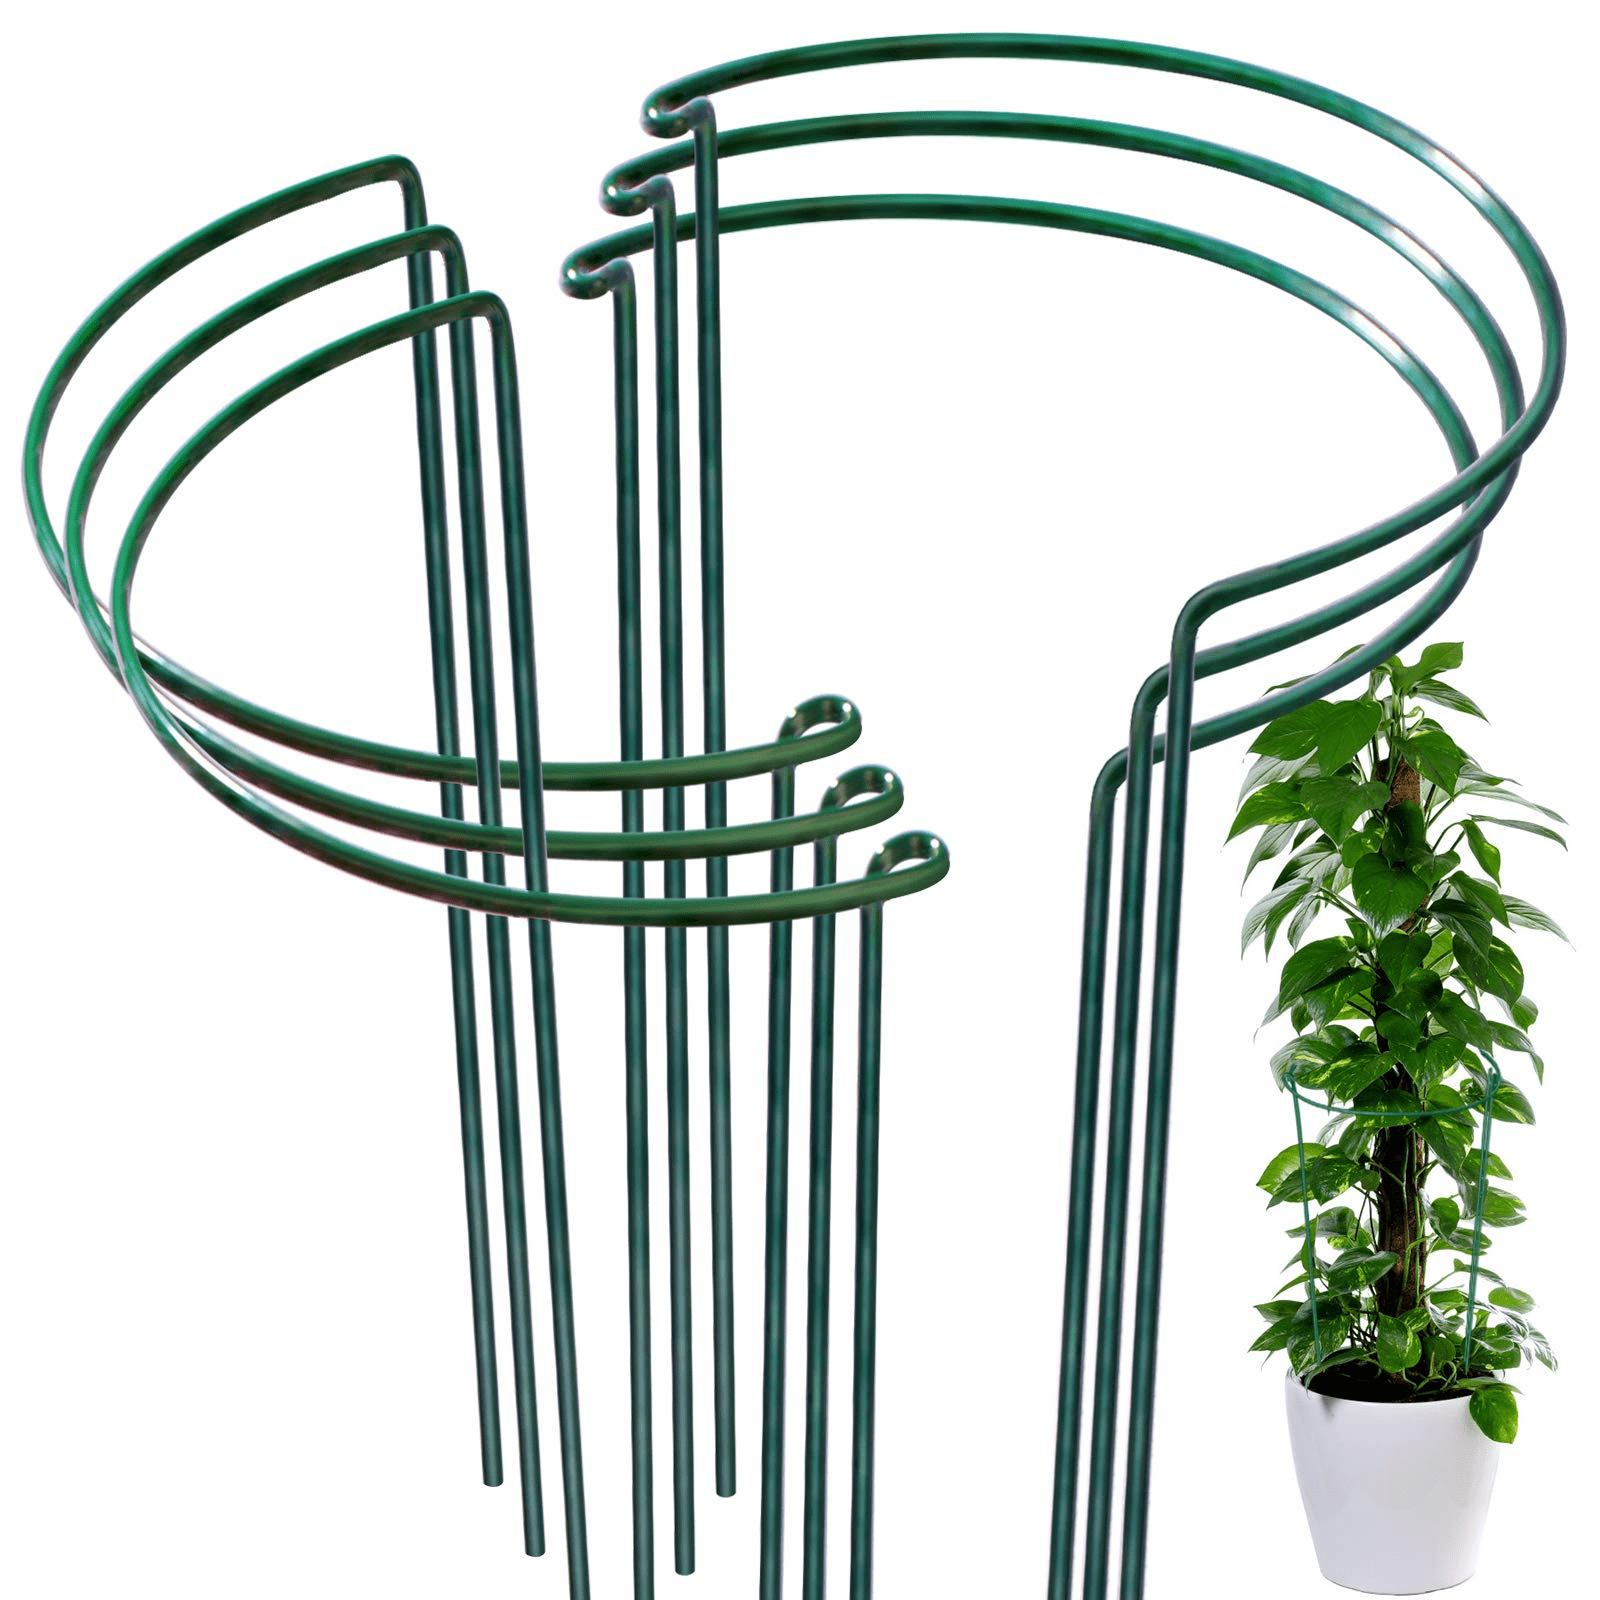 Details about   Garden Metal Herbaceous Plant Flower Support Rings Stakes Frame Wire Grow Trees 